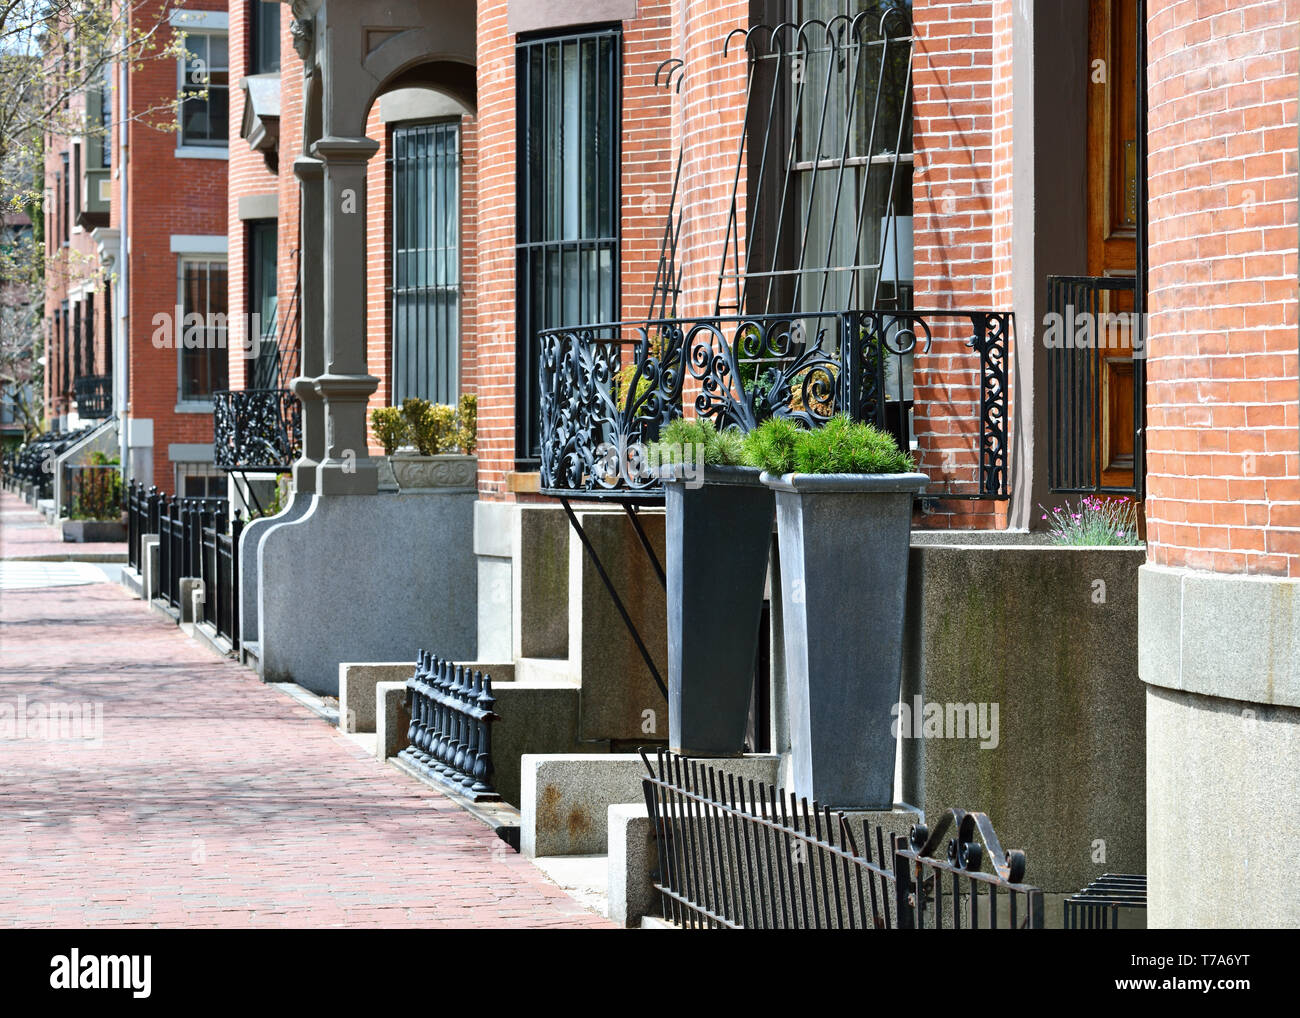 Boston South End architecture. Red brick sidewalk and row house facades, cast iron fences, grates and balconies, stone entrance steps, garden urn, sty Stock Photo